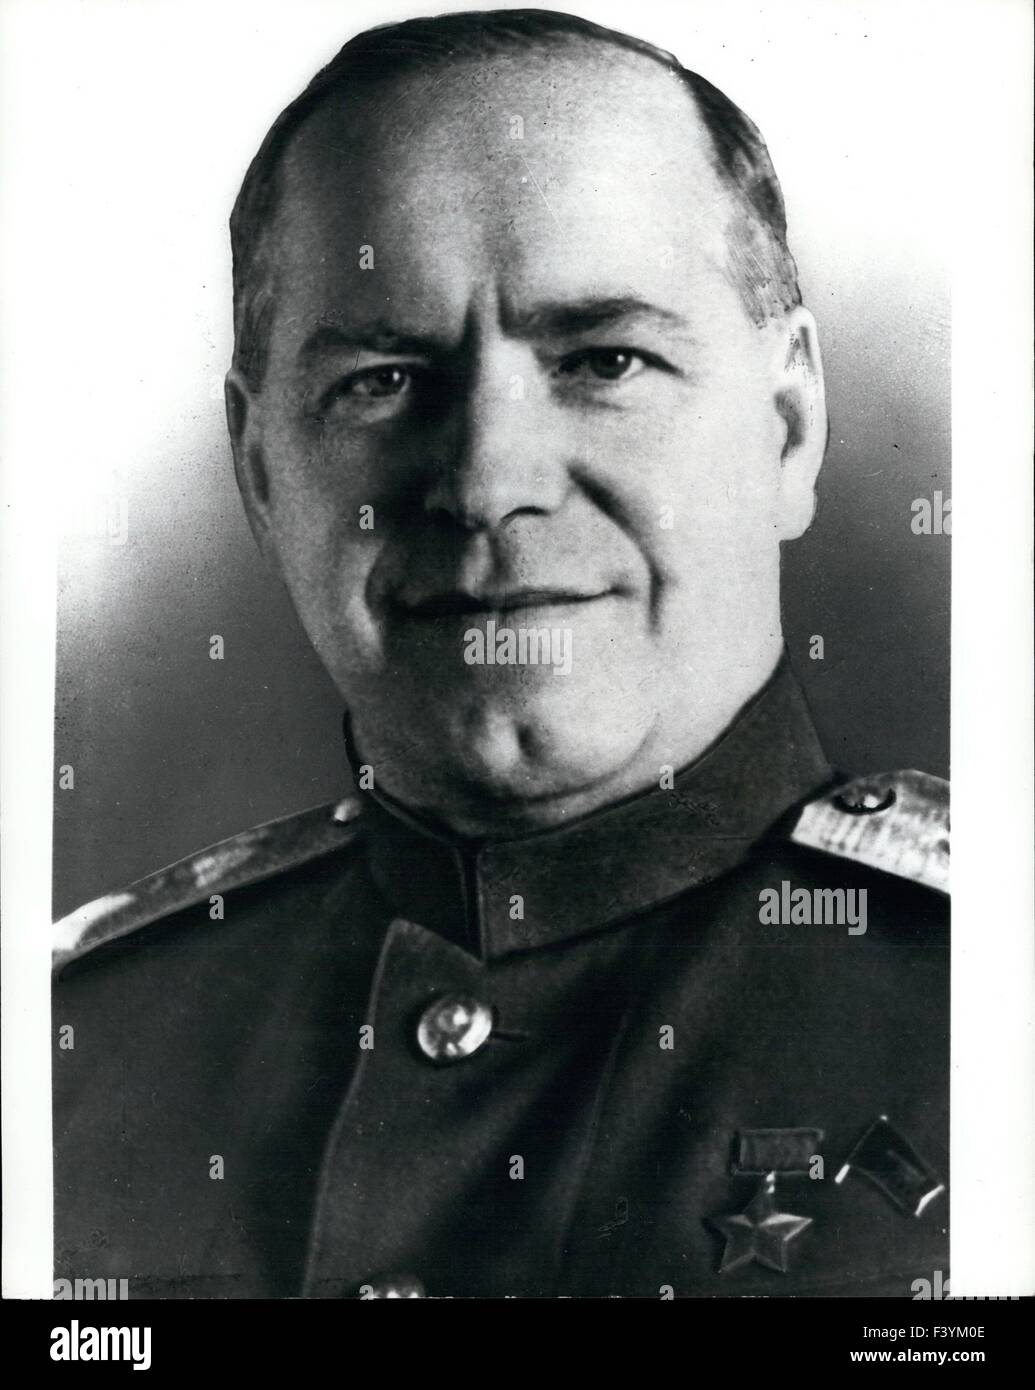 General Zhukov dies Marshal Zhukov the famous Russian General of the last war died today aged 78. 18th June, 1974. Photo Shows: Portrait of the late Marshal Zhukov who died today. © Keystone Pictures USA/ZUMAPRESS.com/Alamy Live News Stock Photo